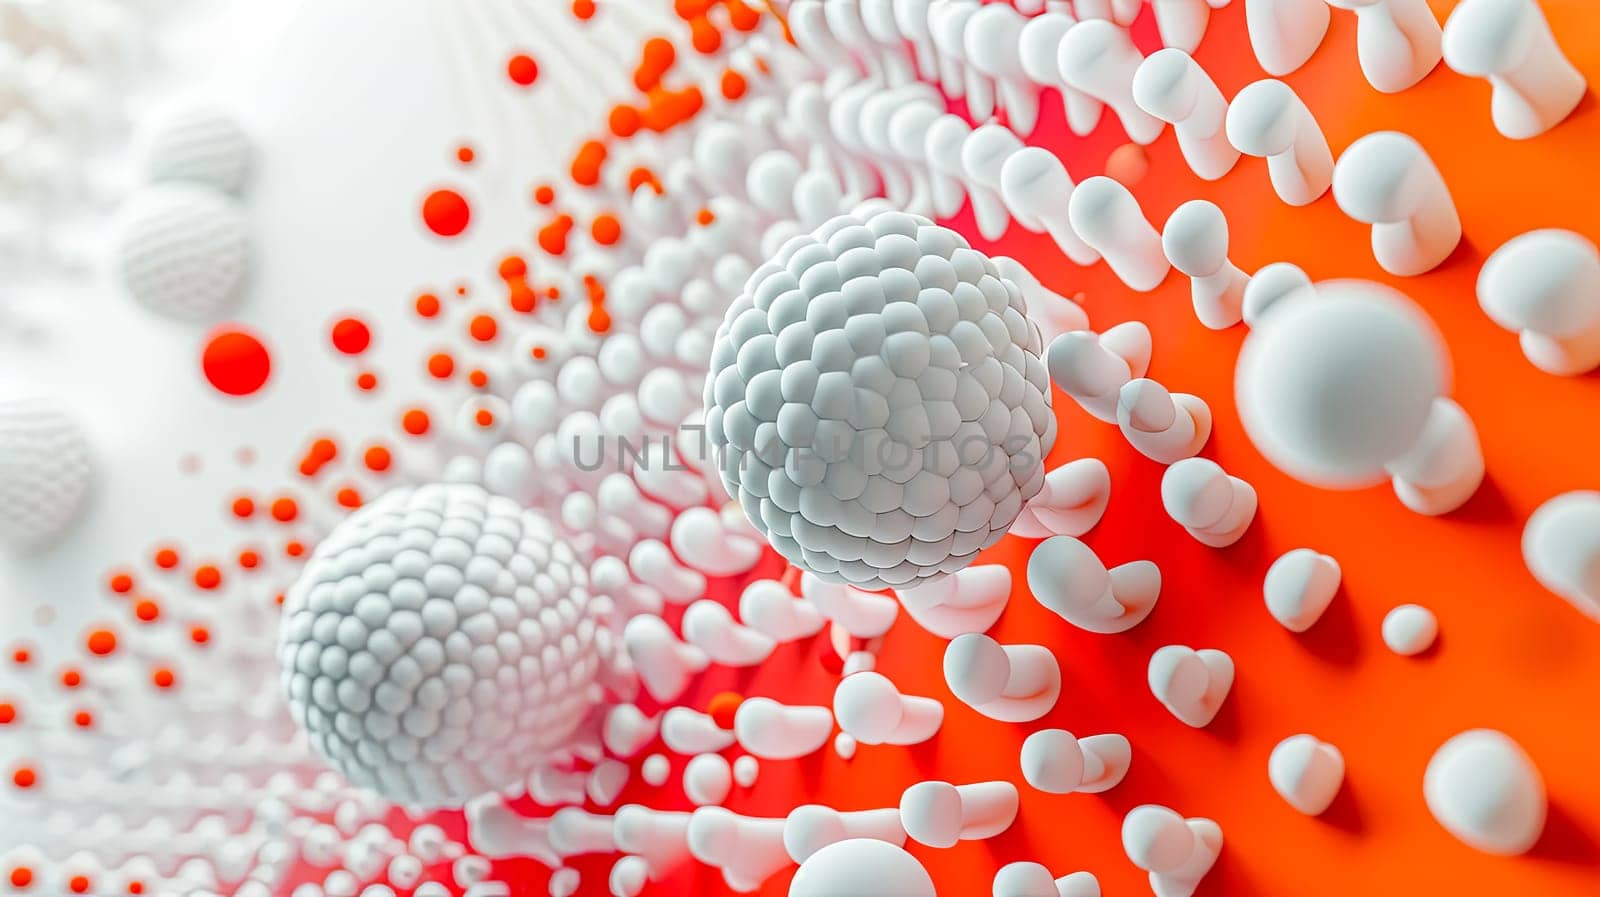 abstract 3D dot art composition. A sea of spherical objects of varying sizes floats through space, creating sense of depth and movement The arrangement of the dots creates a dynamic and rhythmic flow